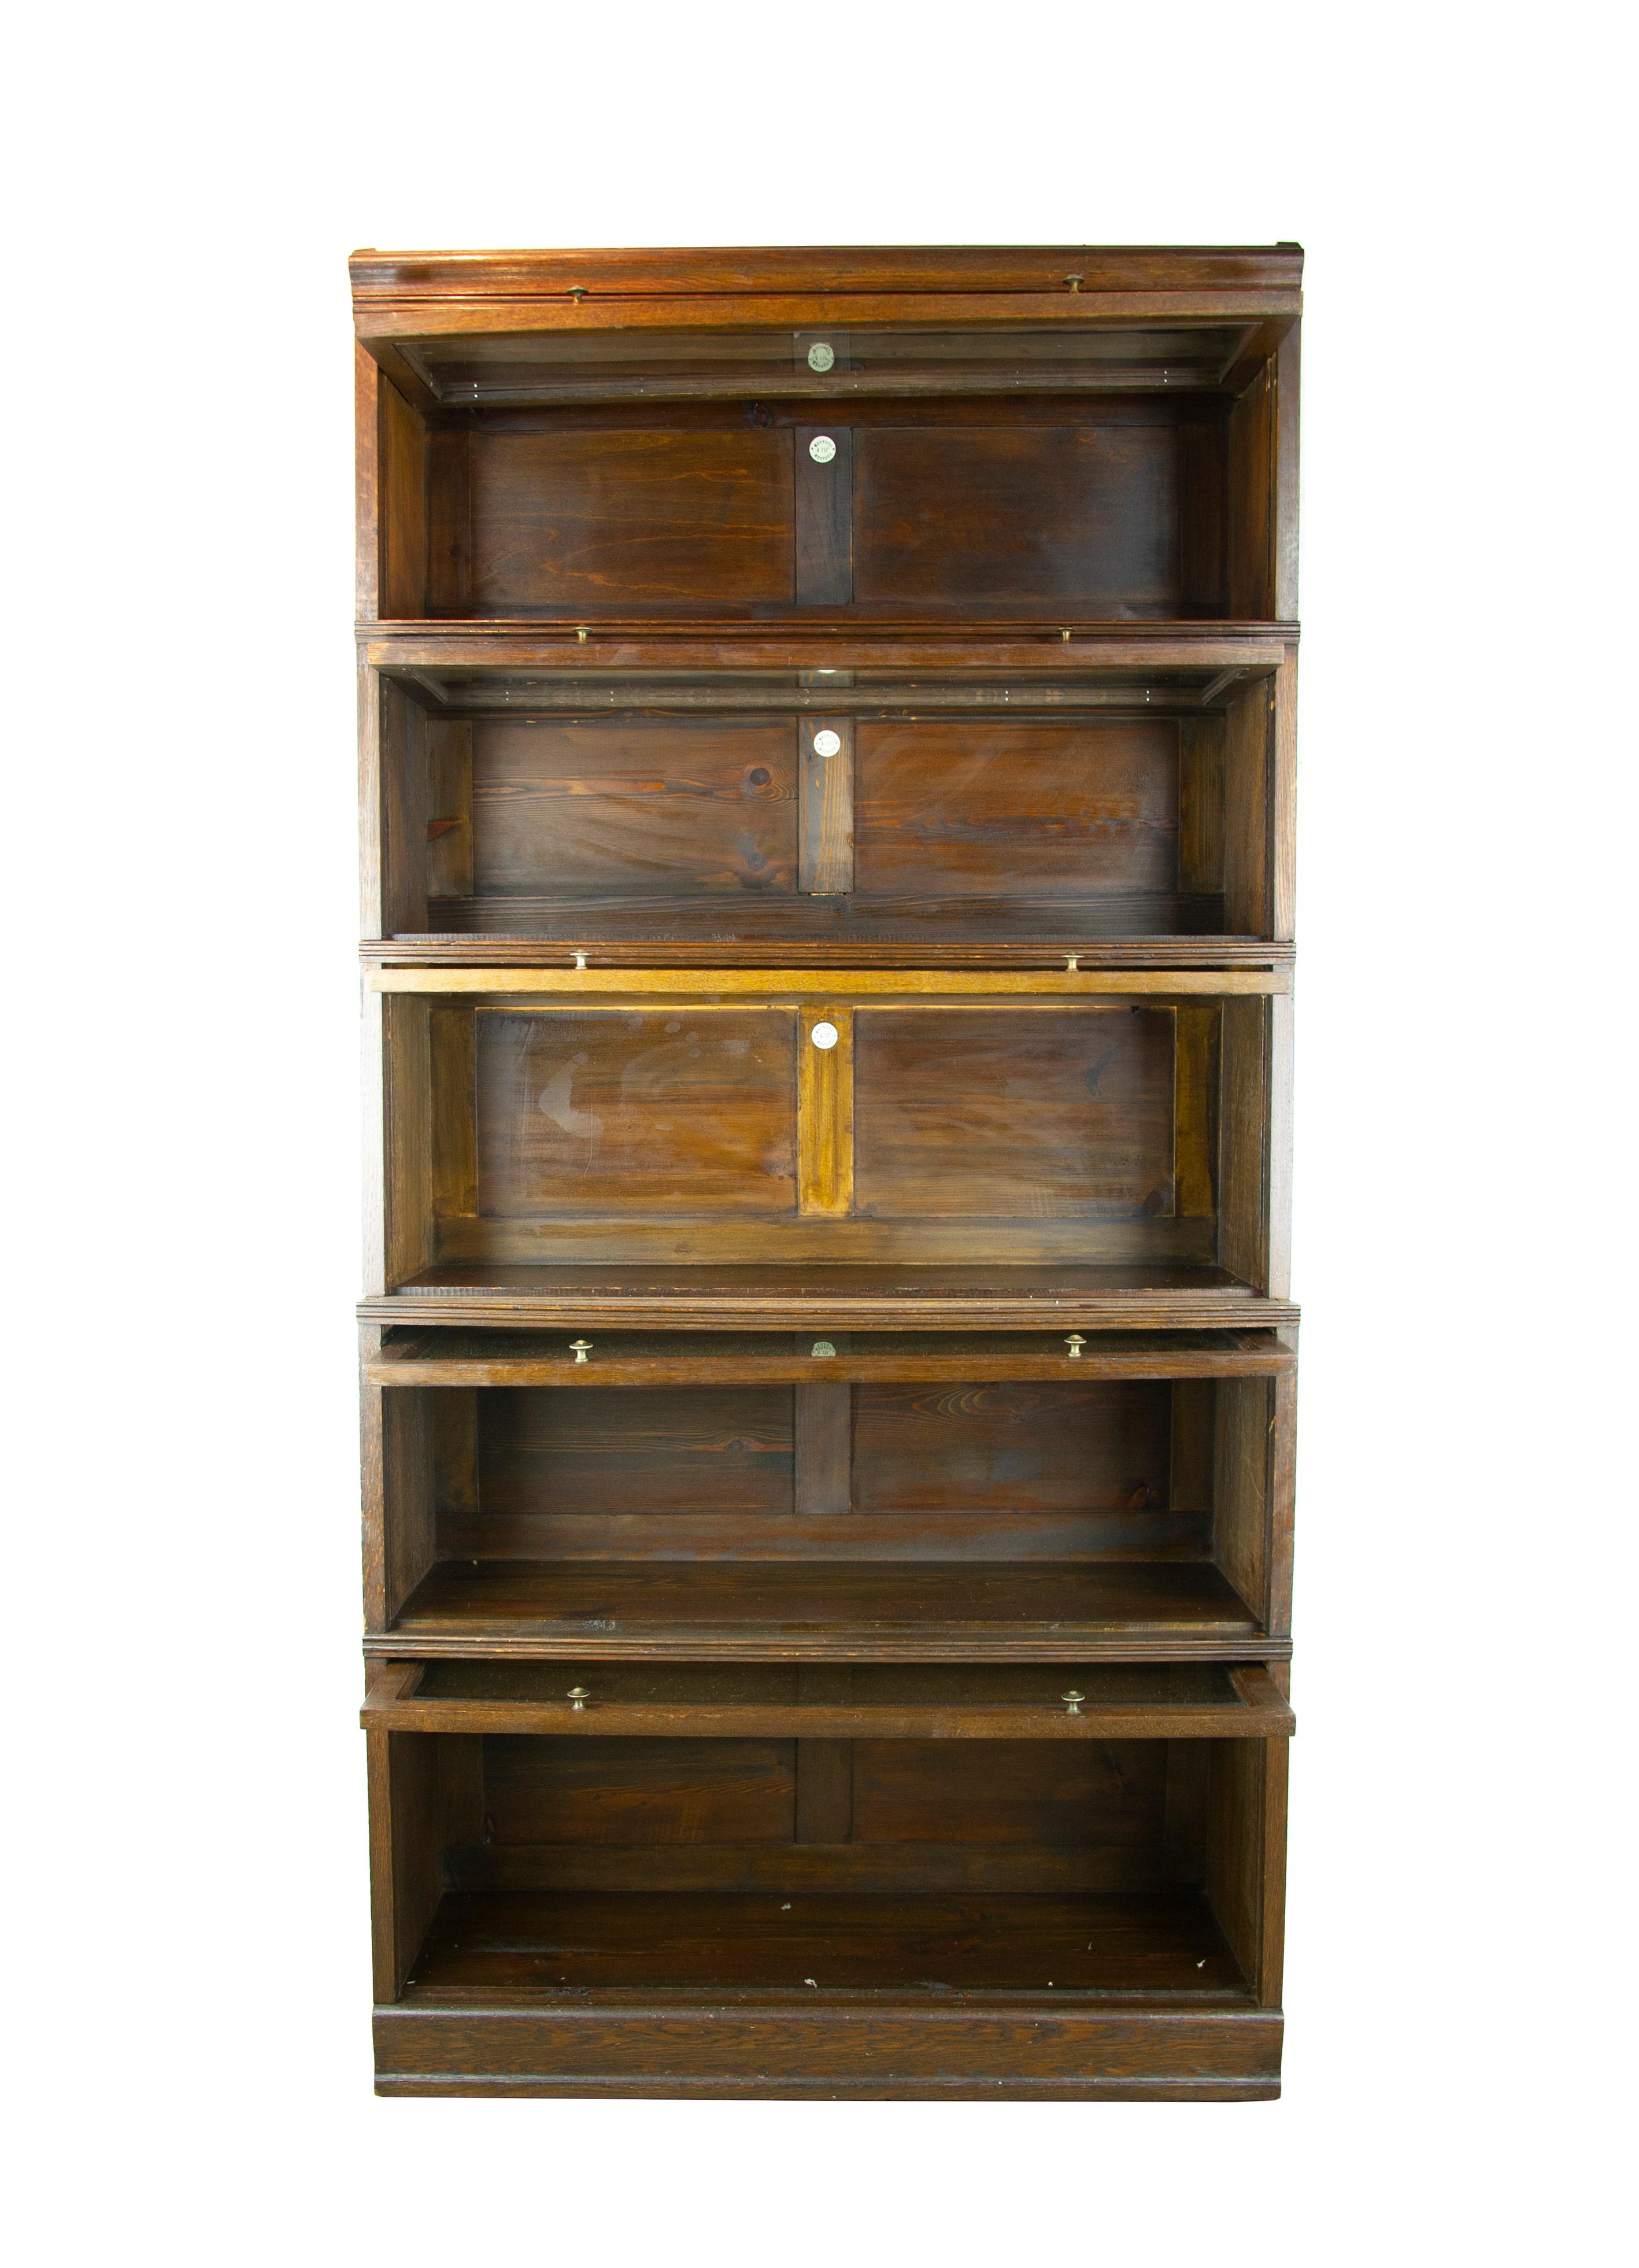 Lawyers bookcase, oak bookcase, barristers bookcase, 5 section bookcase, Scotland 1920, antique furniture, B1273.

Scotland 1920
Solid oak construction with original finish
Molded top
Five sections with original glass
Original brass